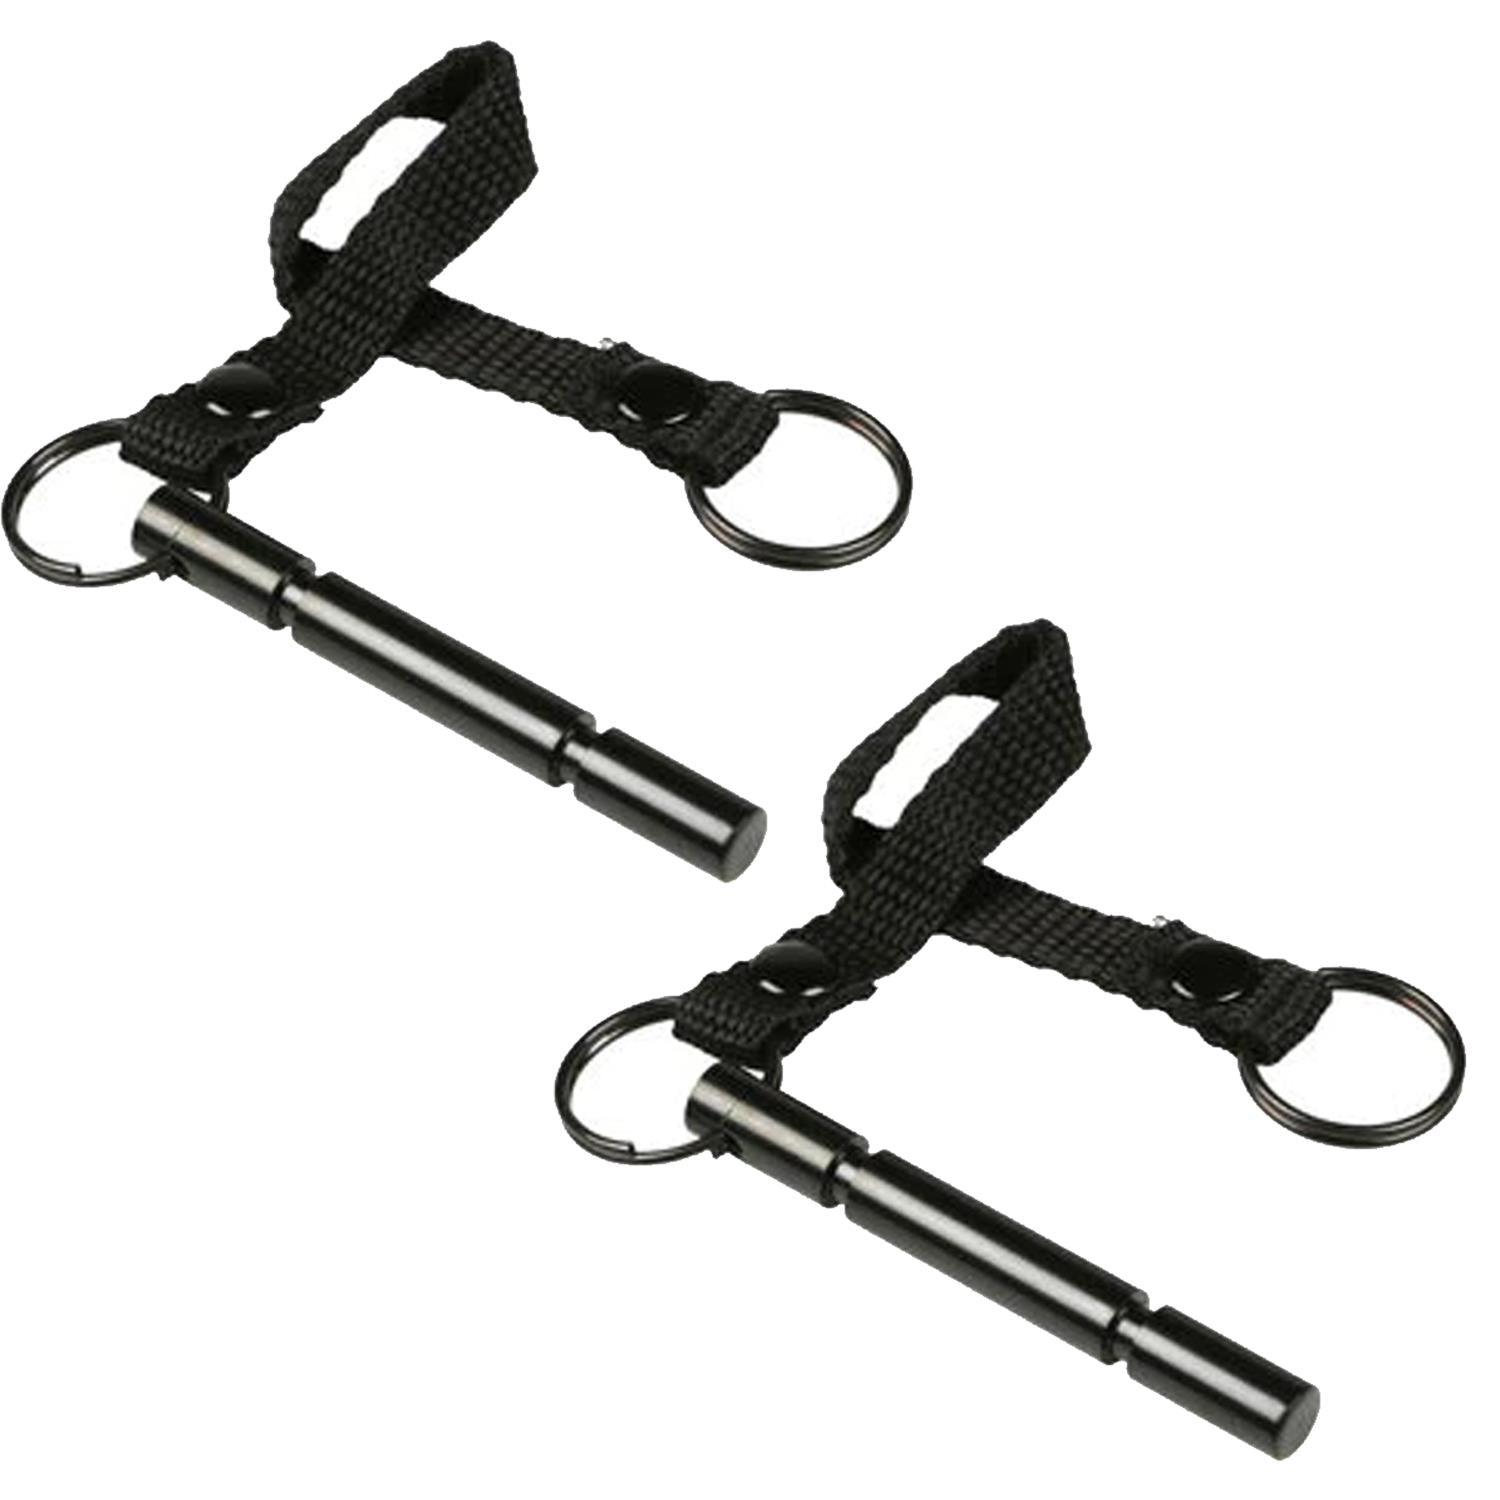 2 x Gravity Speaker Stand Replacement Safety Pin and Harness - DY Pro Audio